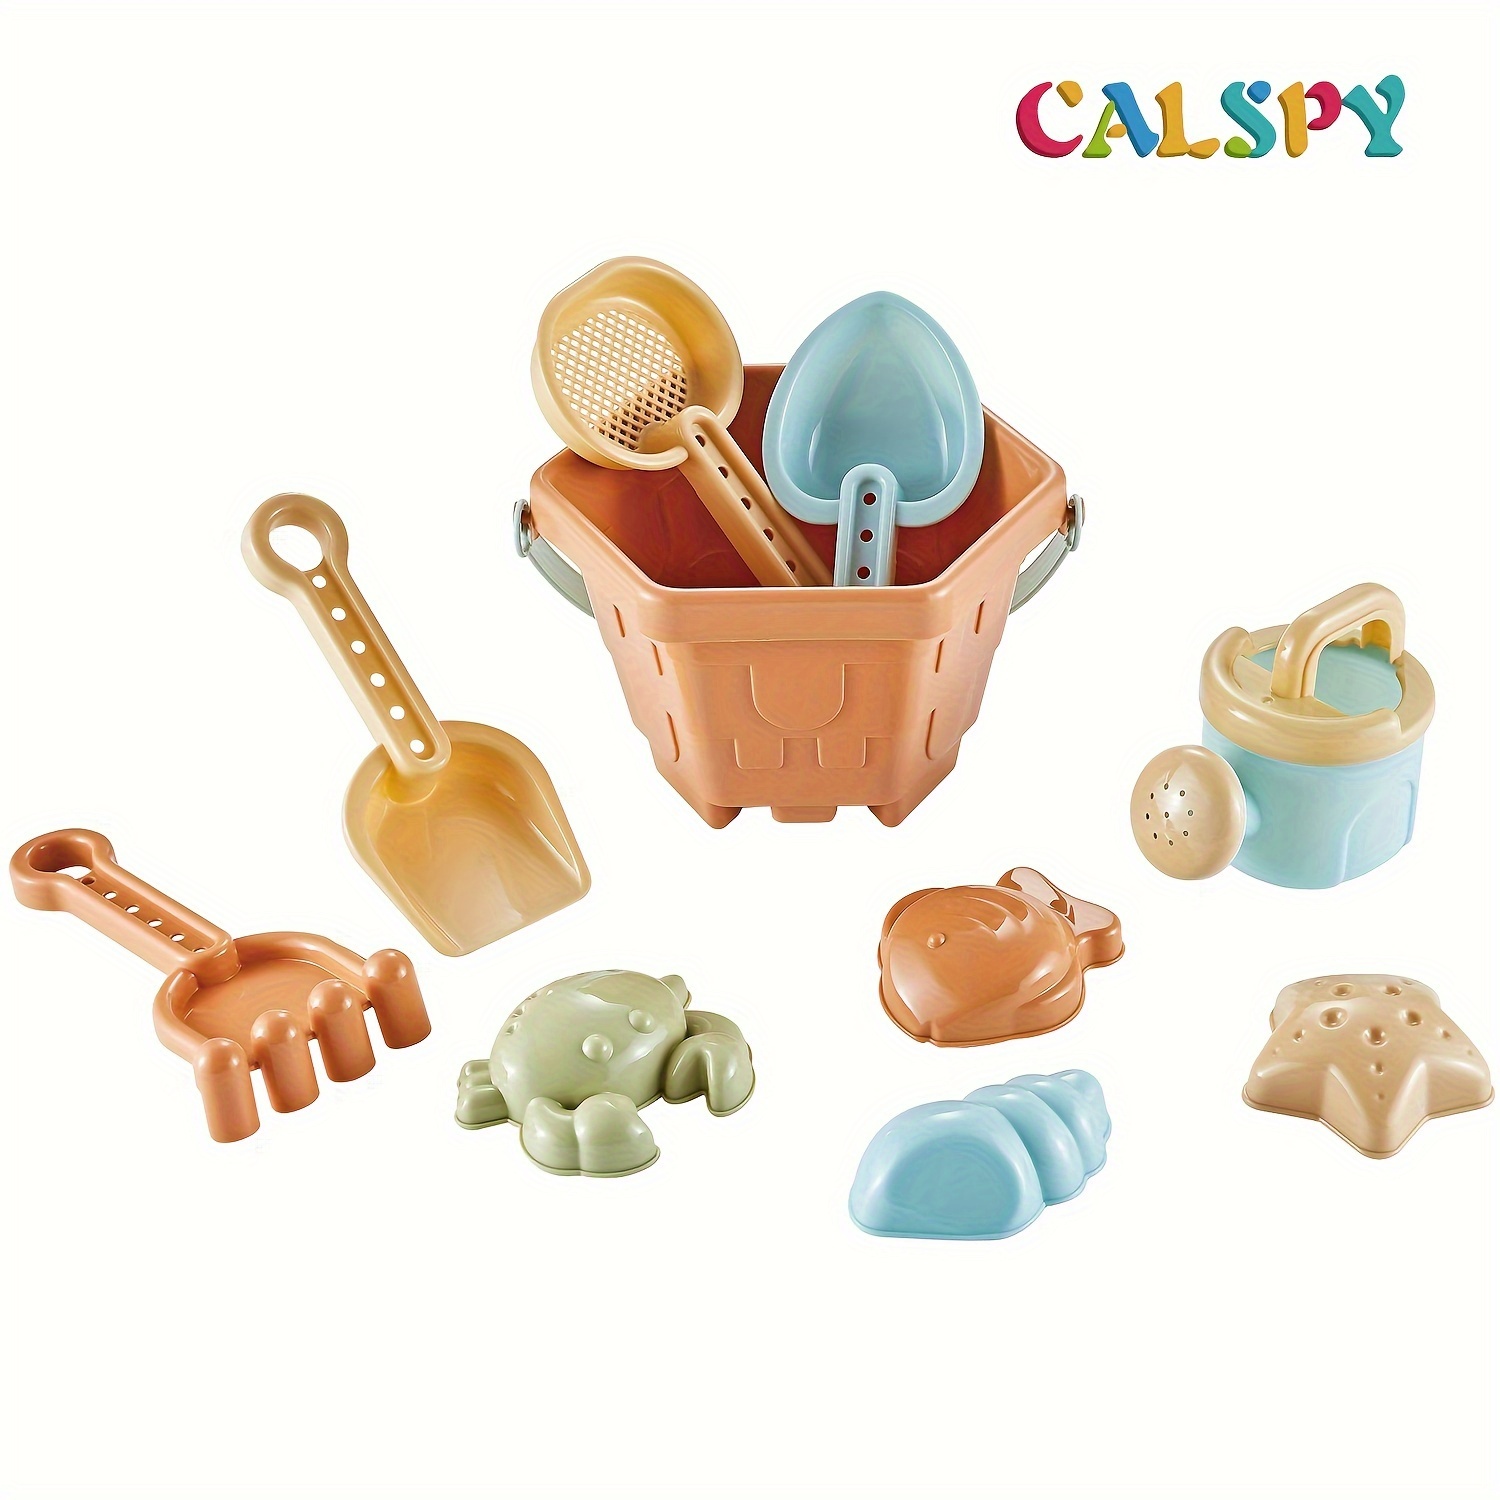 calspy 10pcs beach toys set sand box toys for kids outdoor fun engineering vehicle shovel hourglass more sea and beach accessories christmas halloween gift